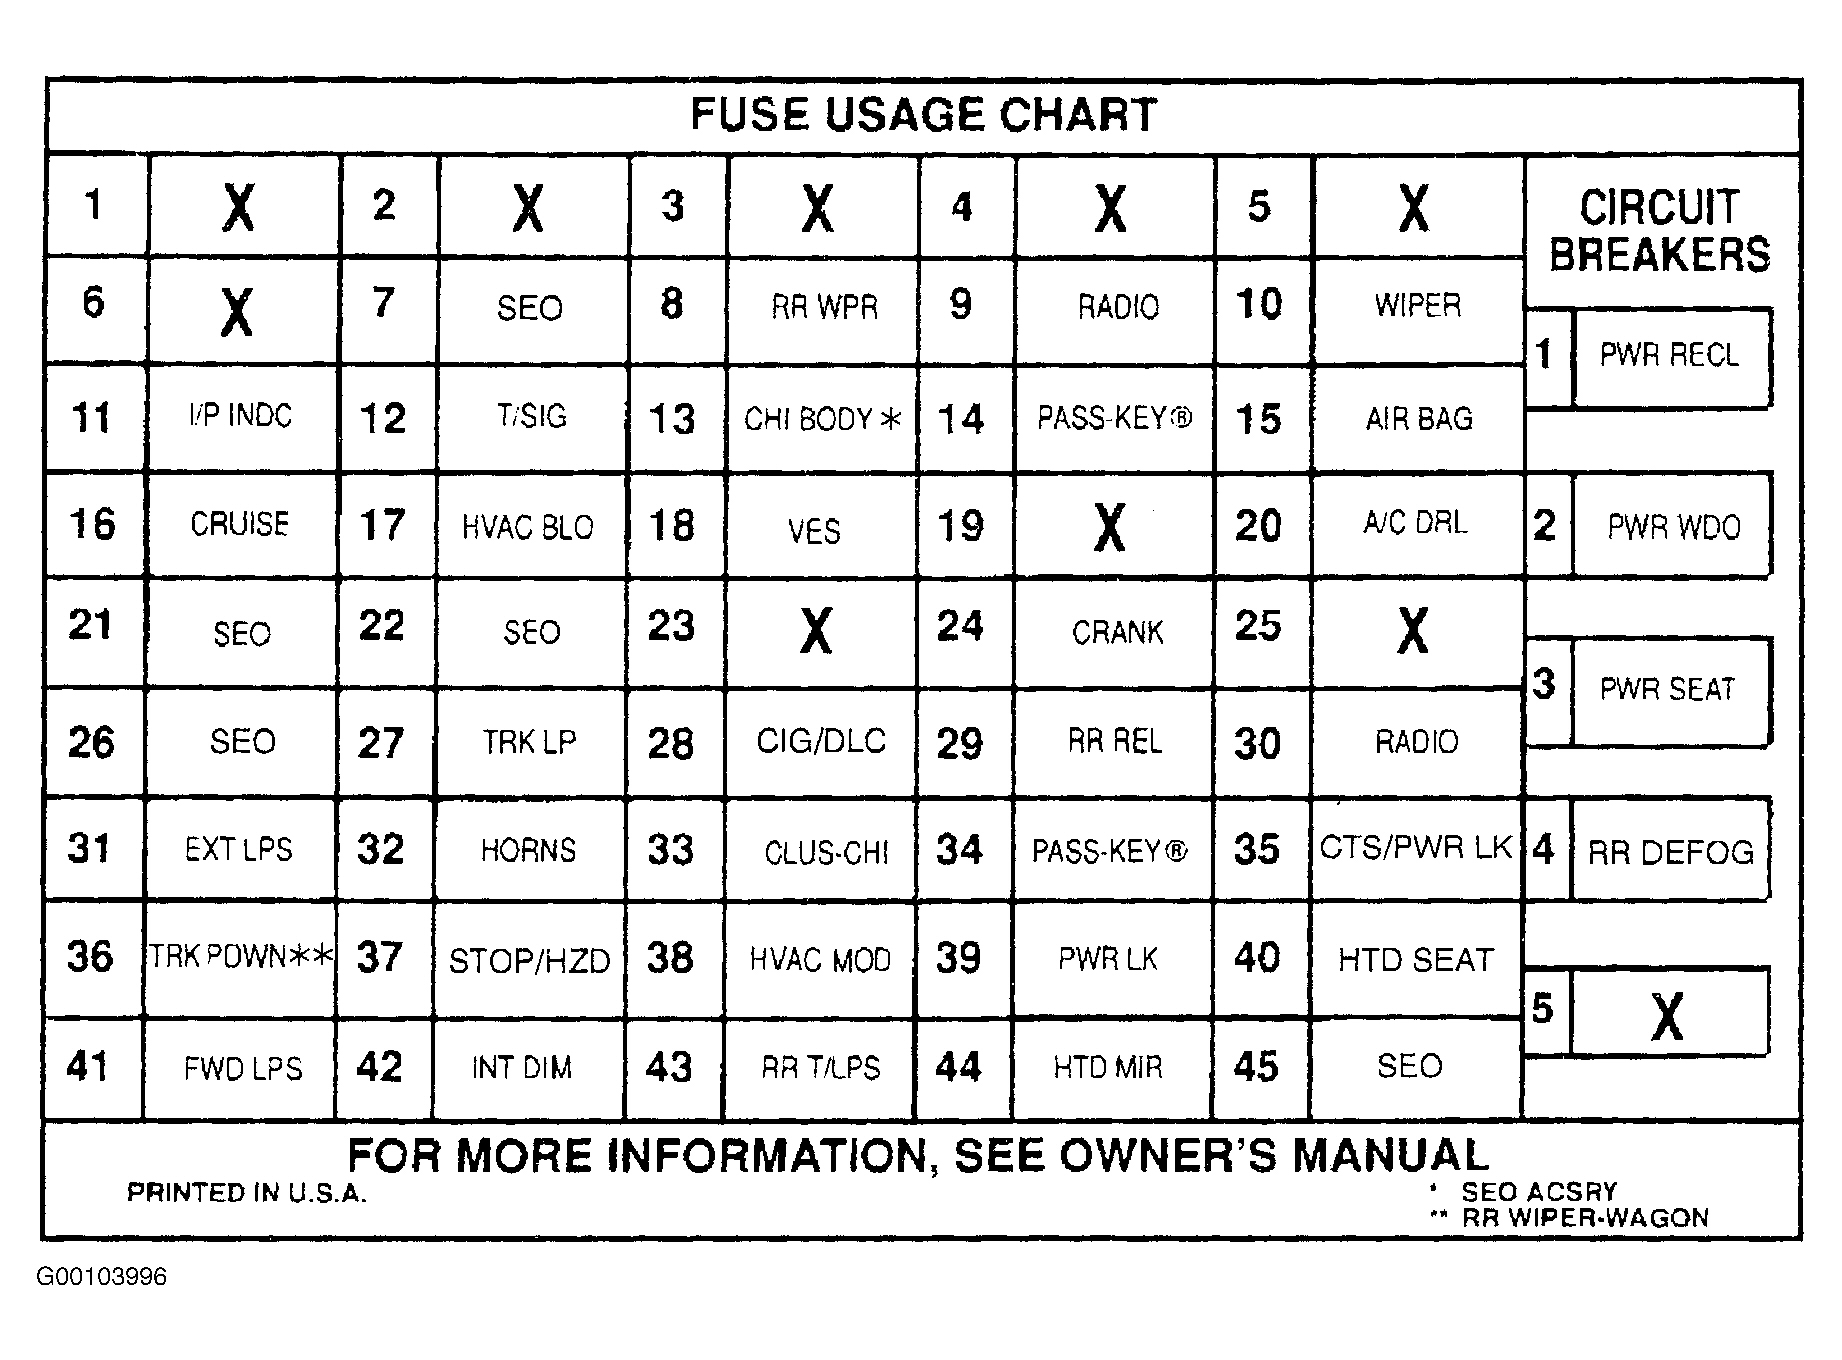 Buick Roadmaster Limited 1996 - Component Locations -  Identifying Instrument Panel Fuse Block Components